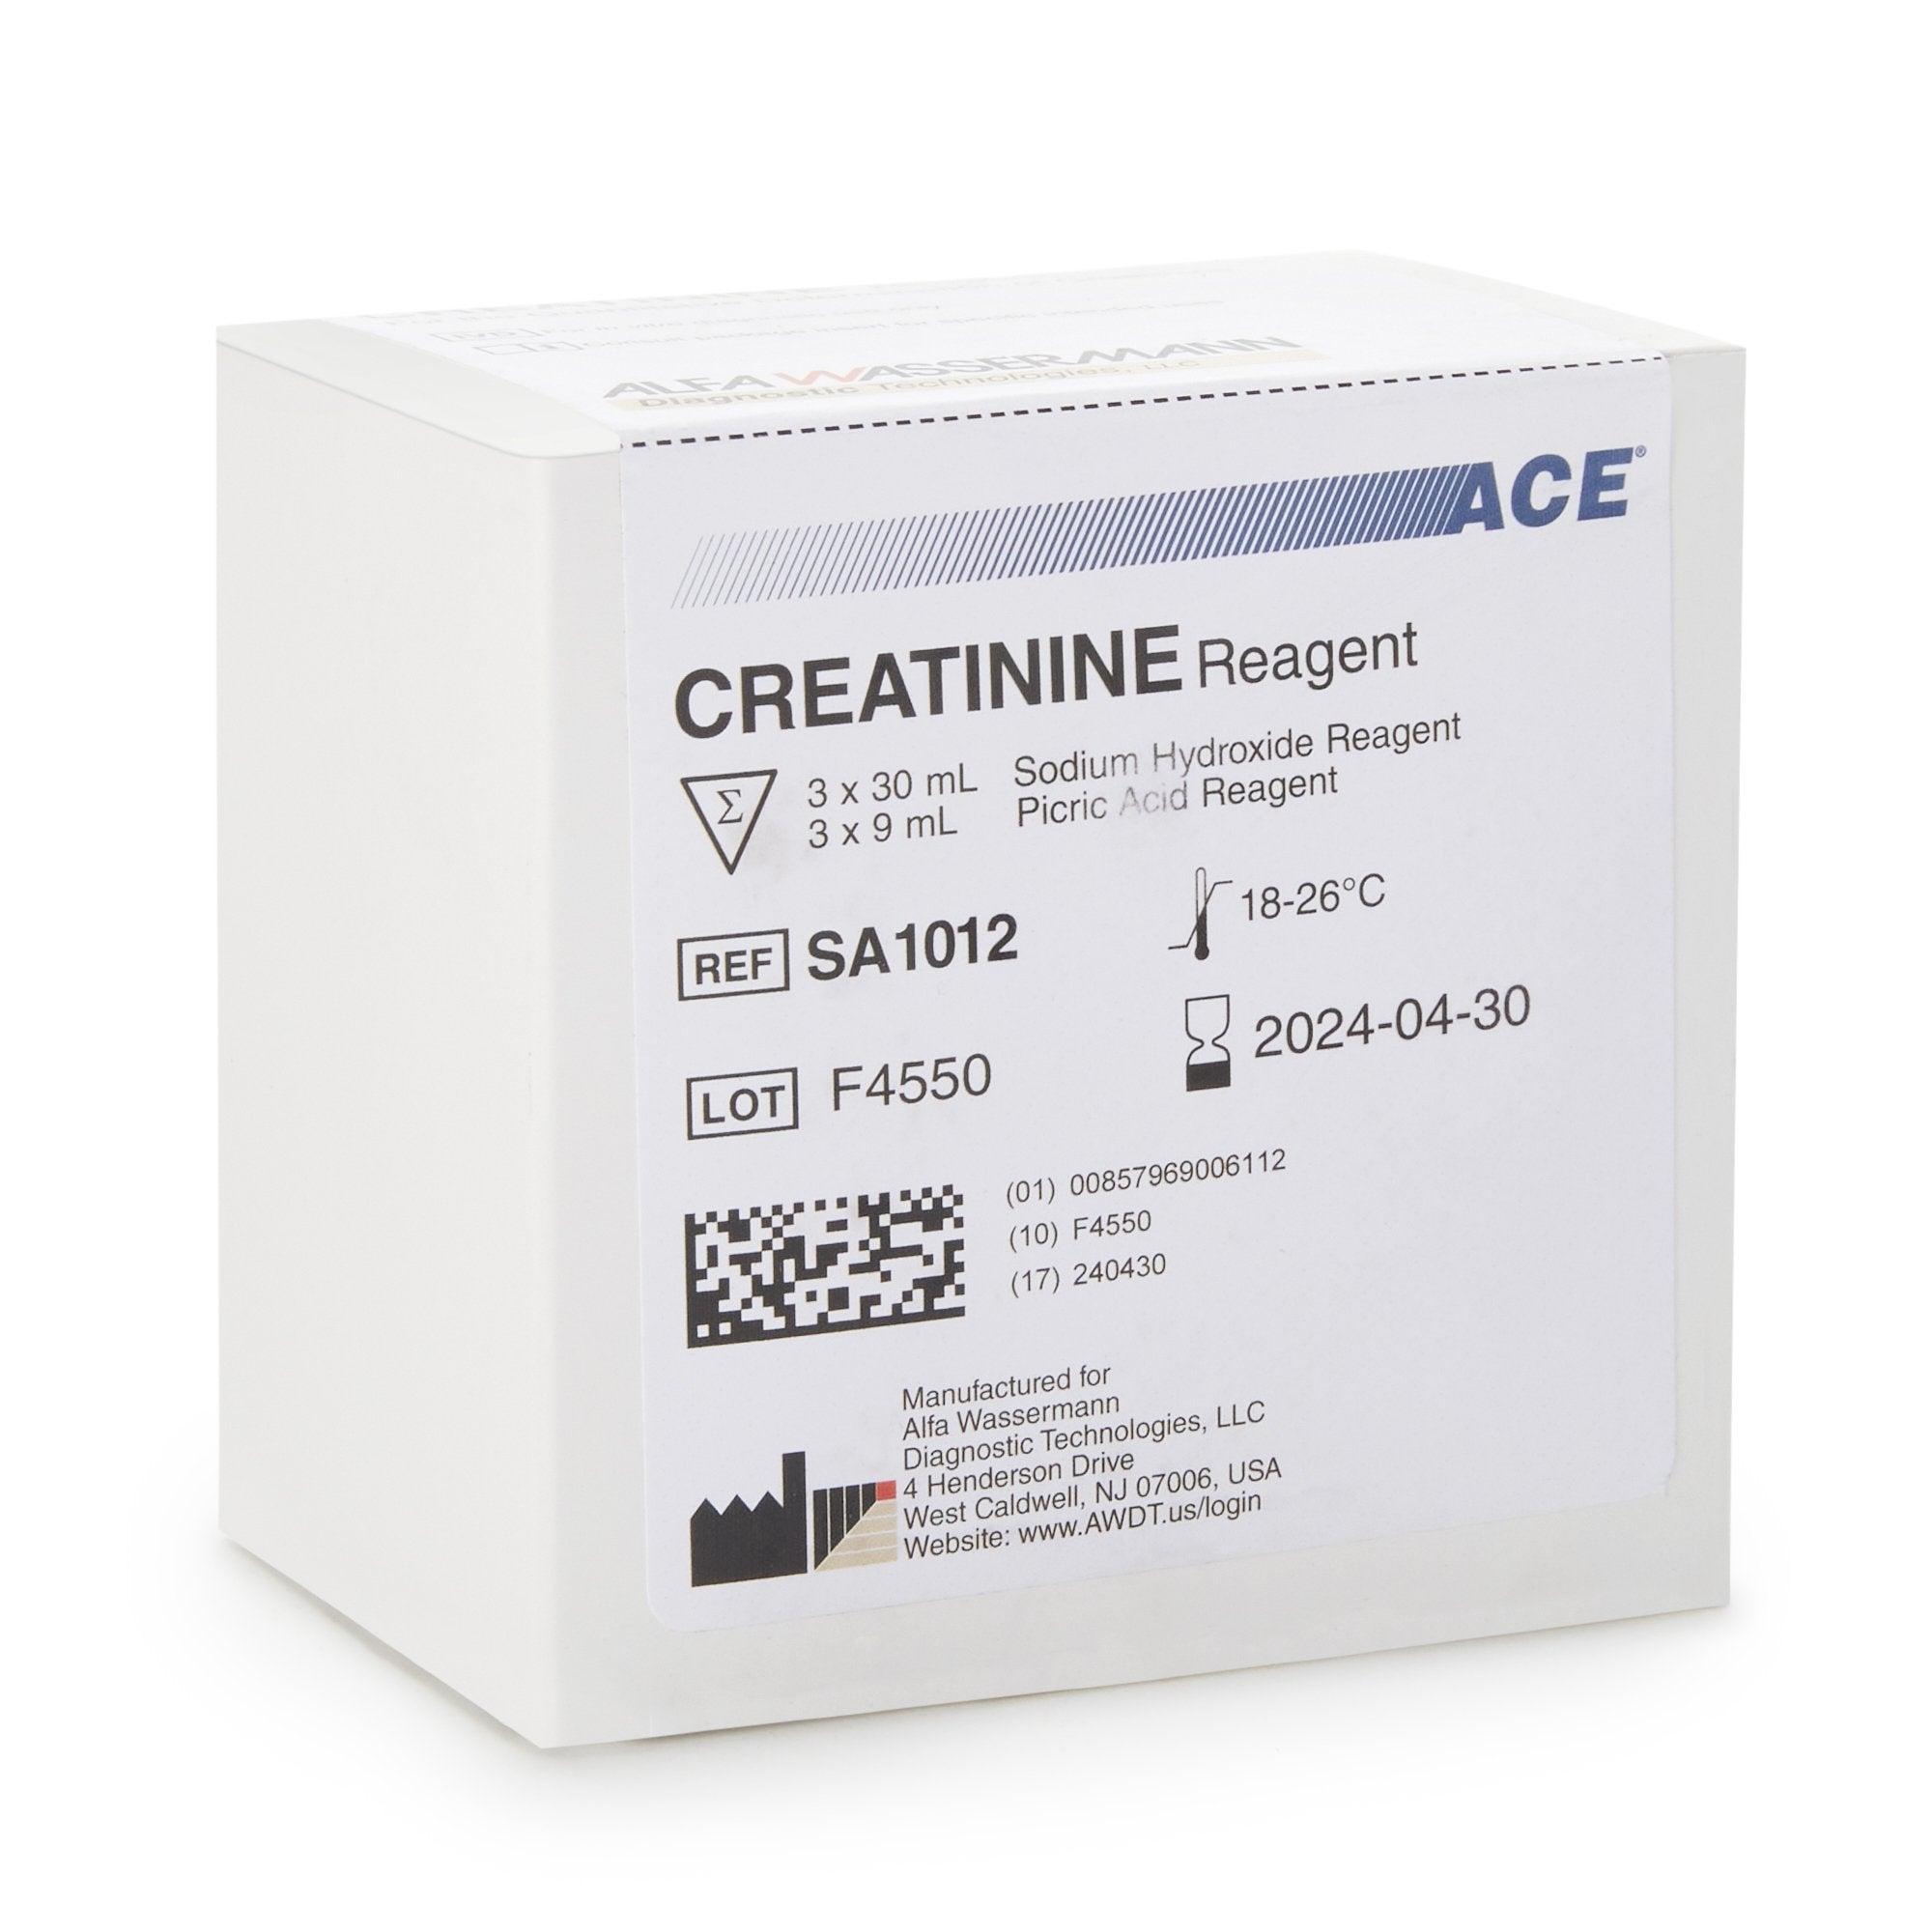 Reagent ACE Renal / General Chemistry Creatinine For ACE and ACE Alera Analyzers 560 Tests R1: 3 X 30 mL, R2: 3 X 9 mL